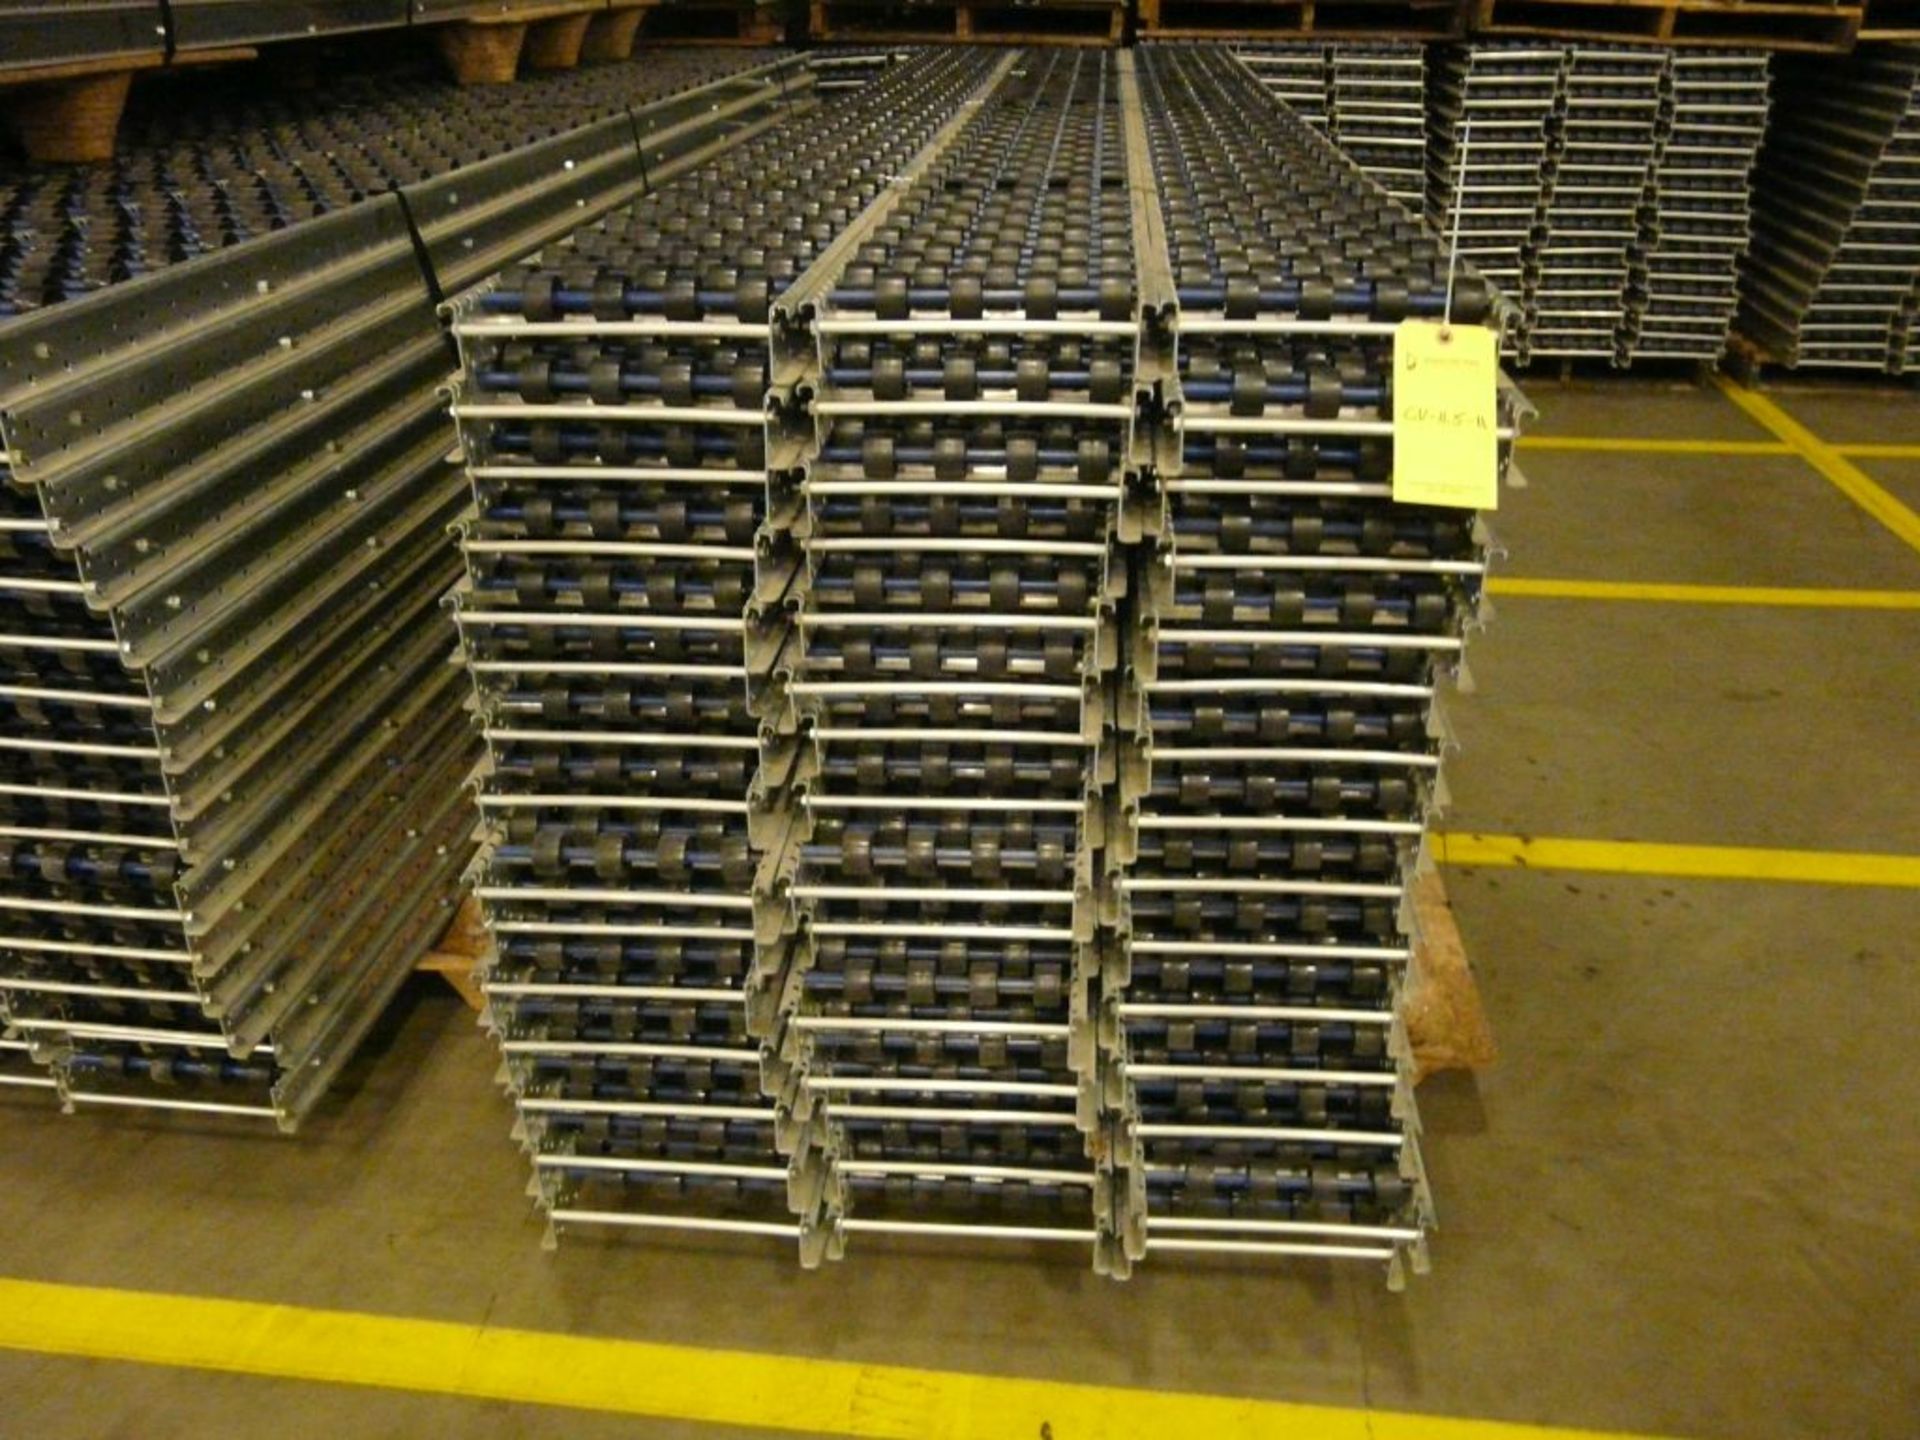 Lot of (90) SpanTrack Wheelbed Carton Flow Conveyors - 11.5'L x 11"W; Tag: 224214 - $30 Lot - Image 2 of 4